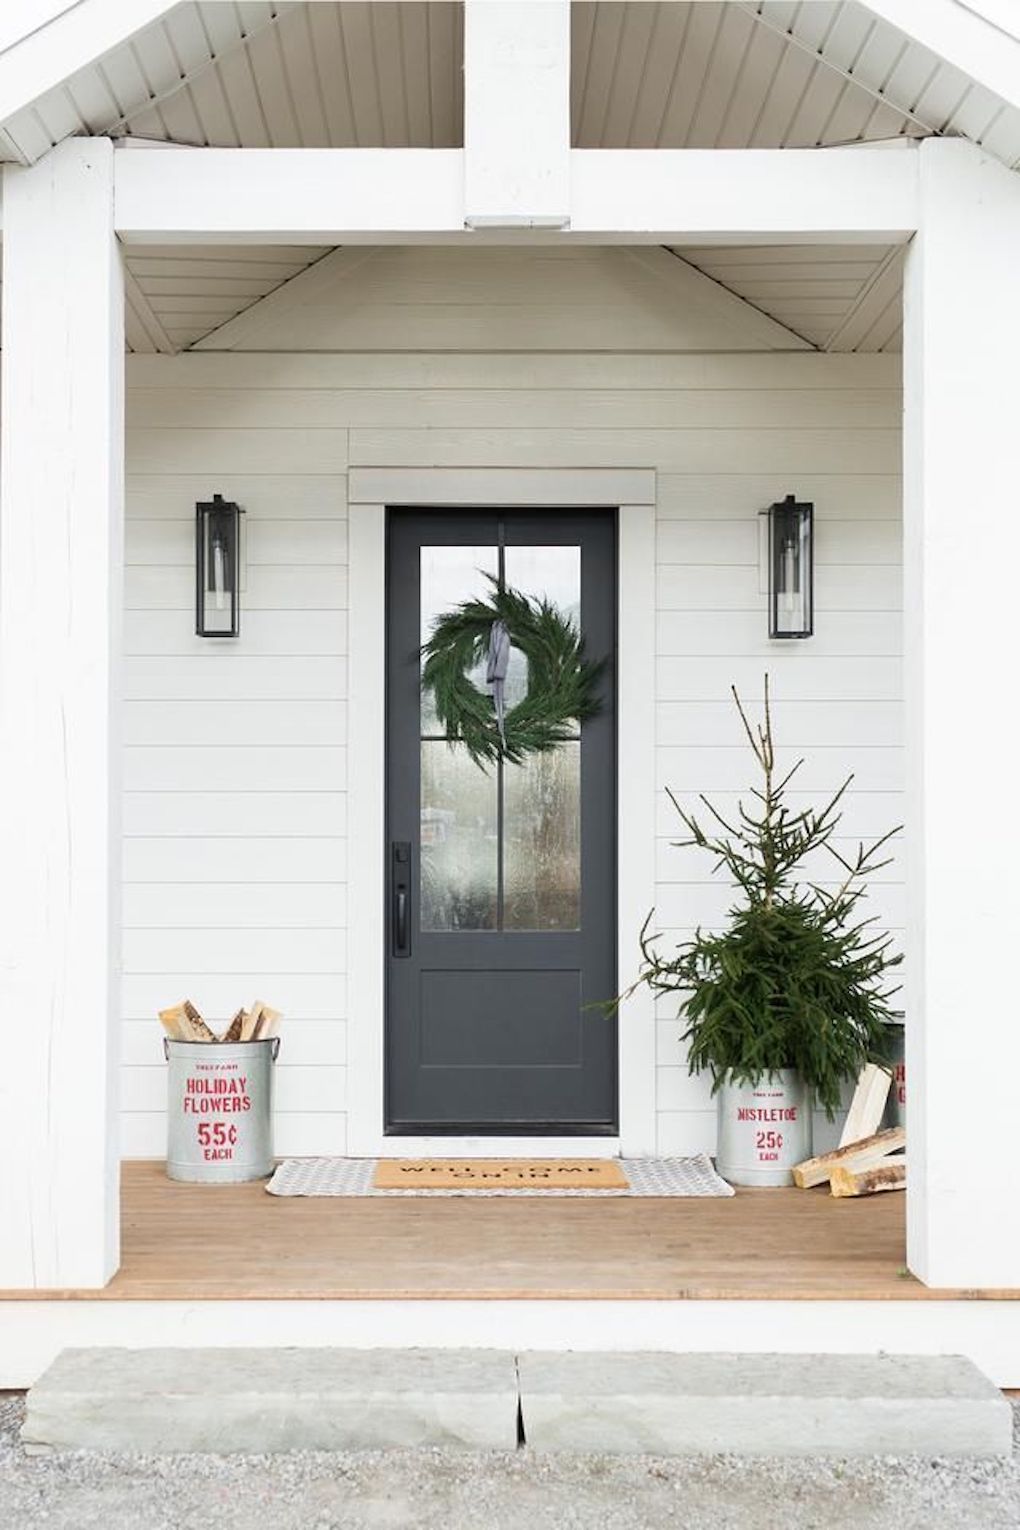 ways to spruce up your exterior. Simple ways to change your exterior and enhance curb appeal